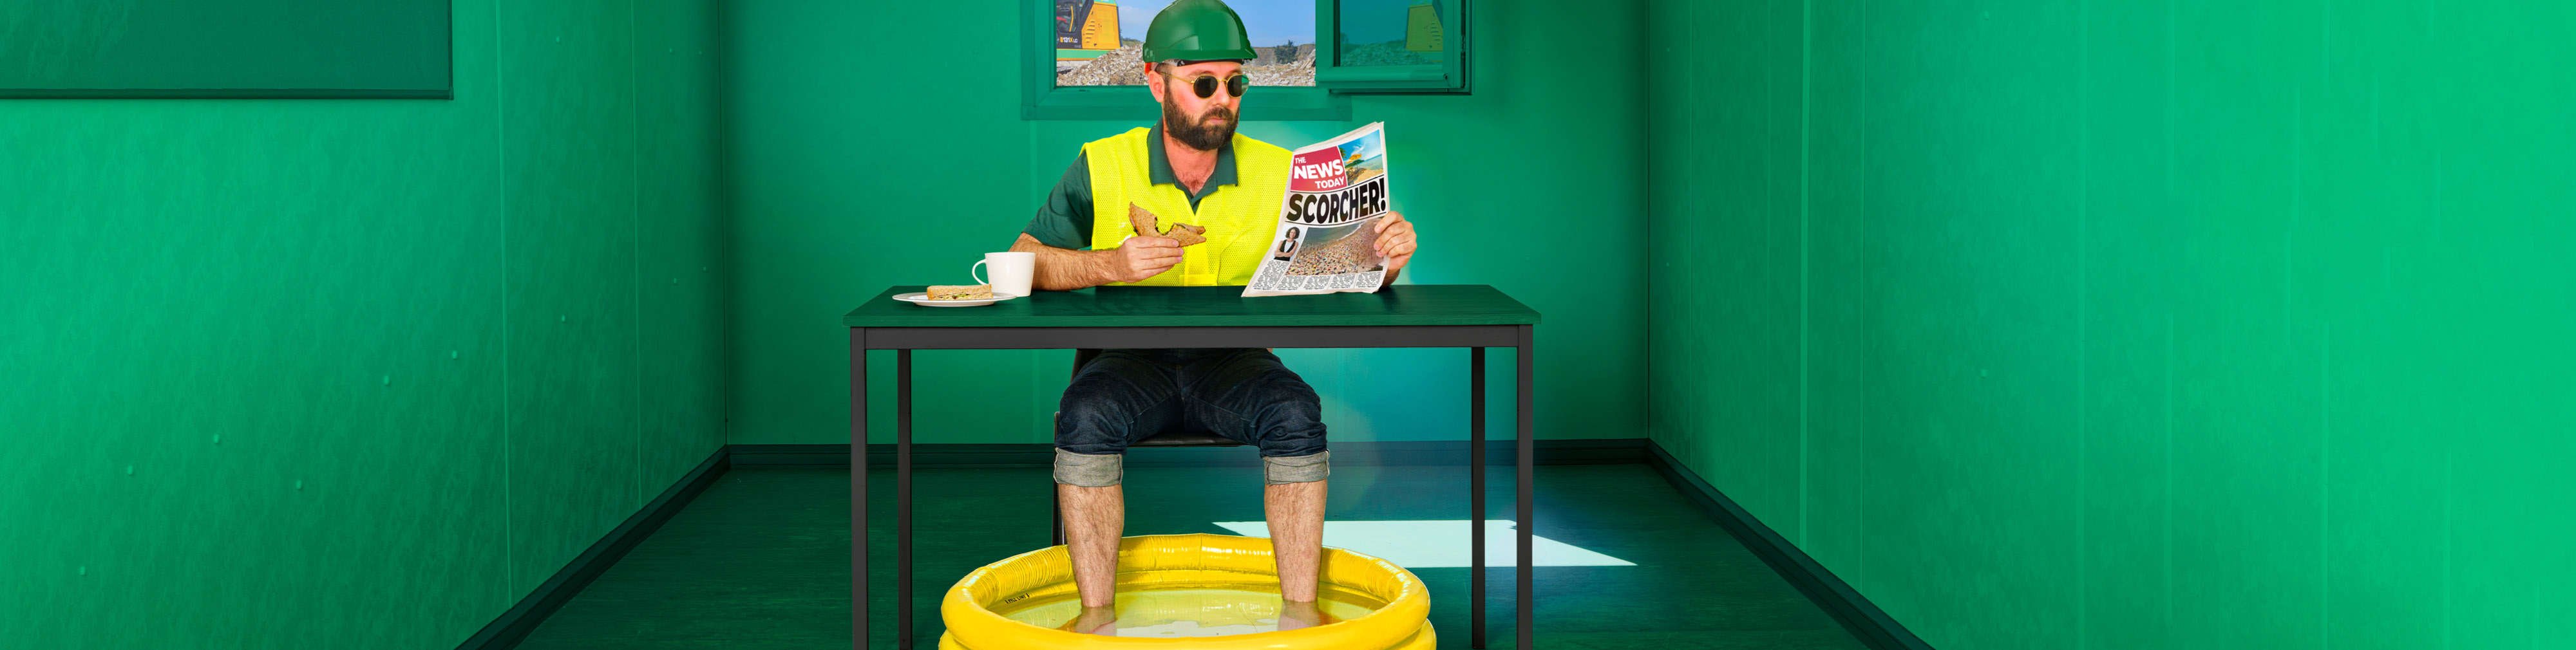 Construction worker sat eating lunch at a table trying to keep cool with there feet in a paddling pool